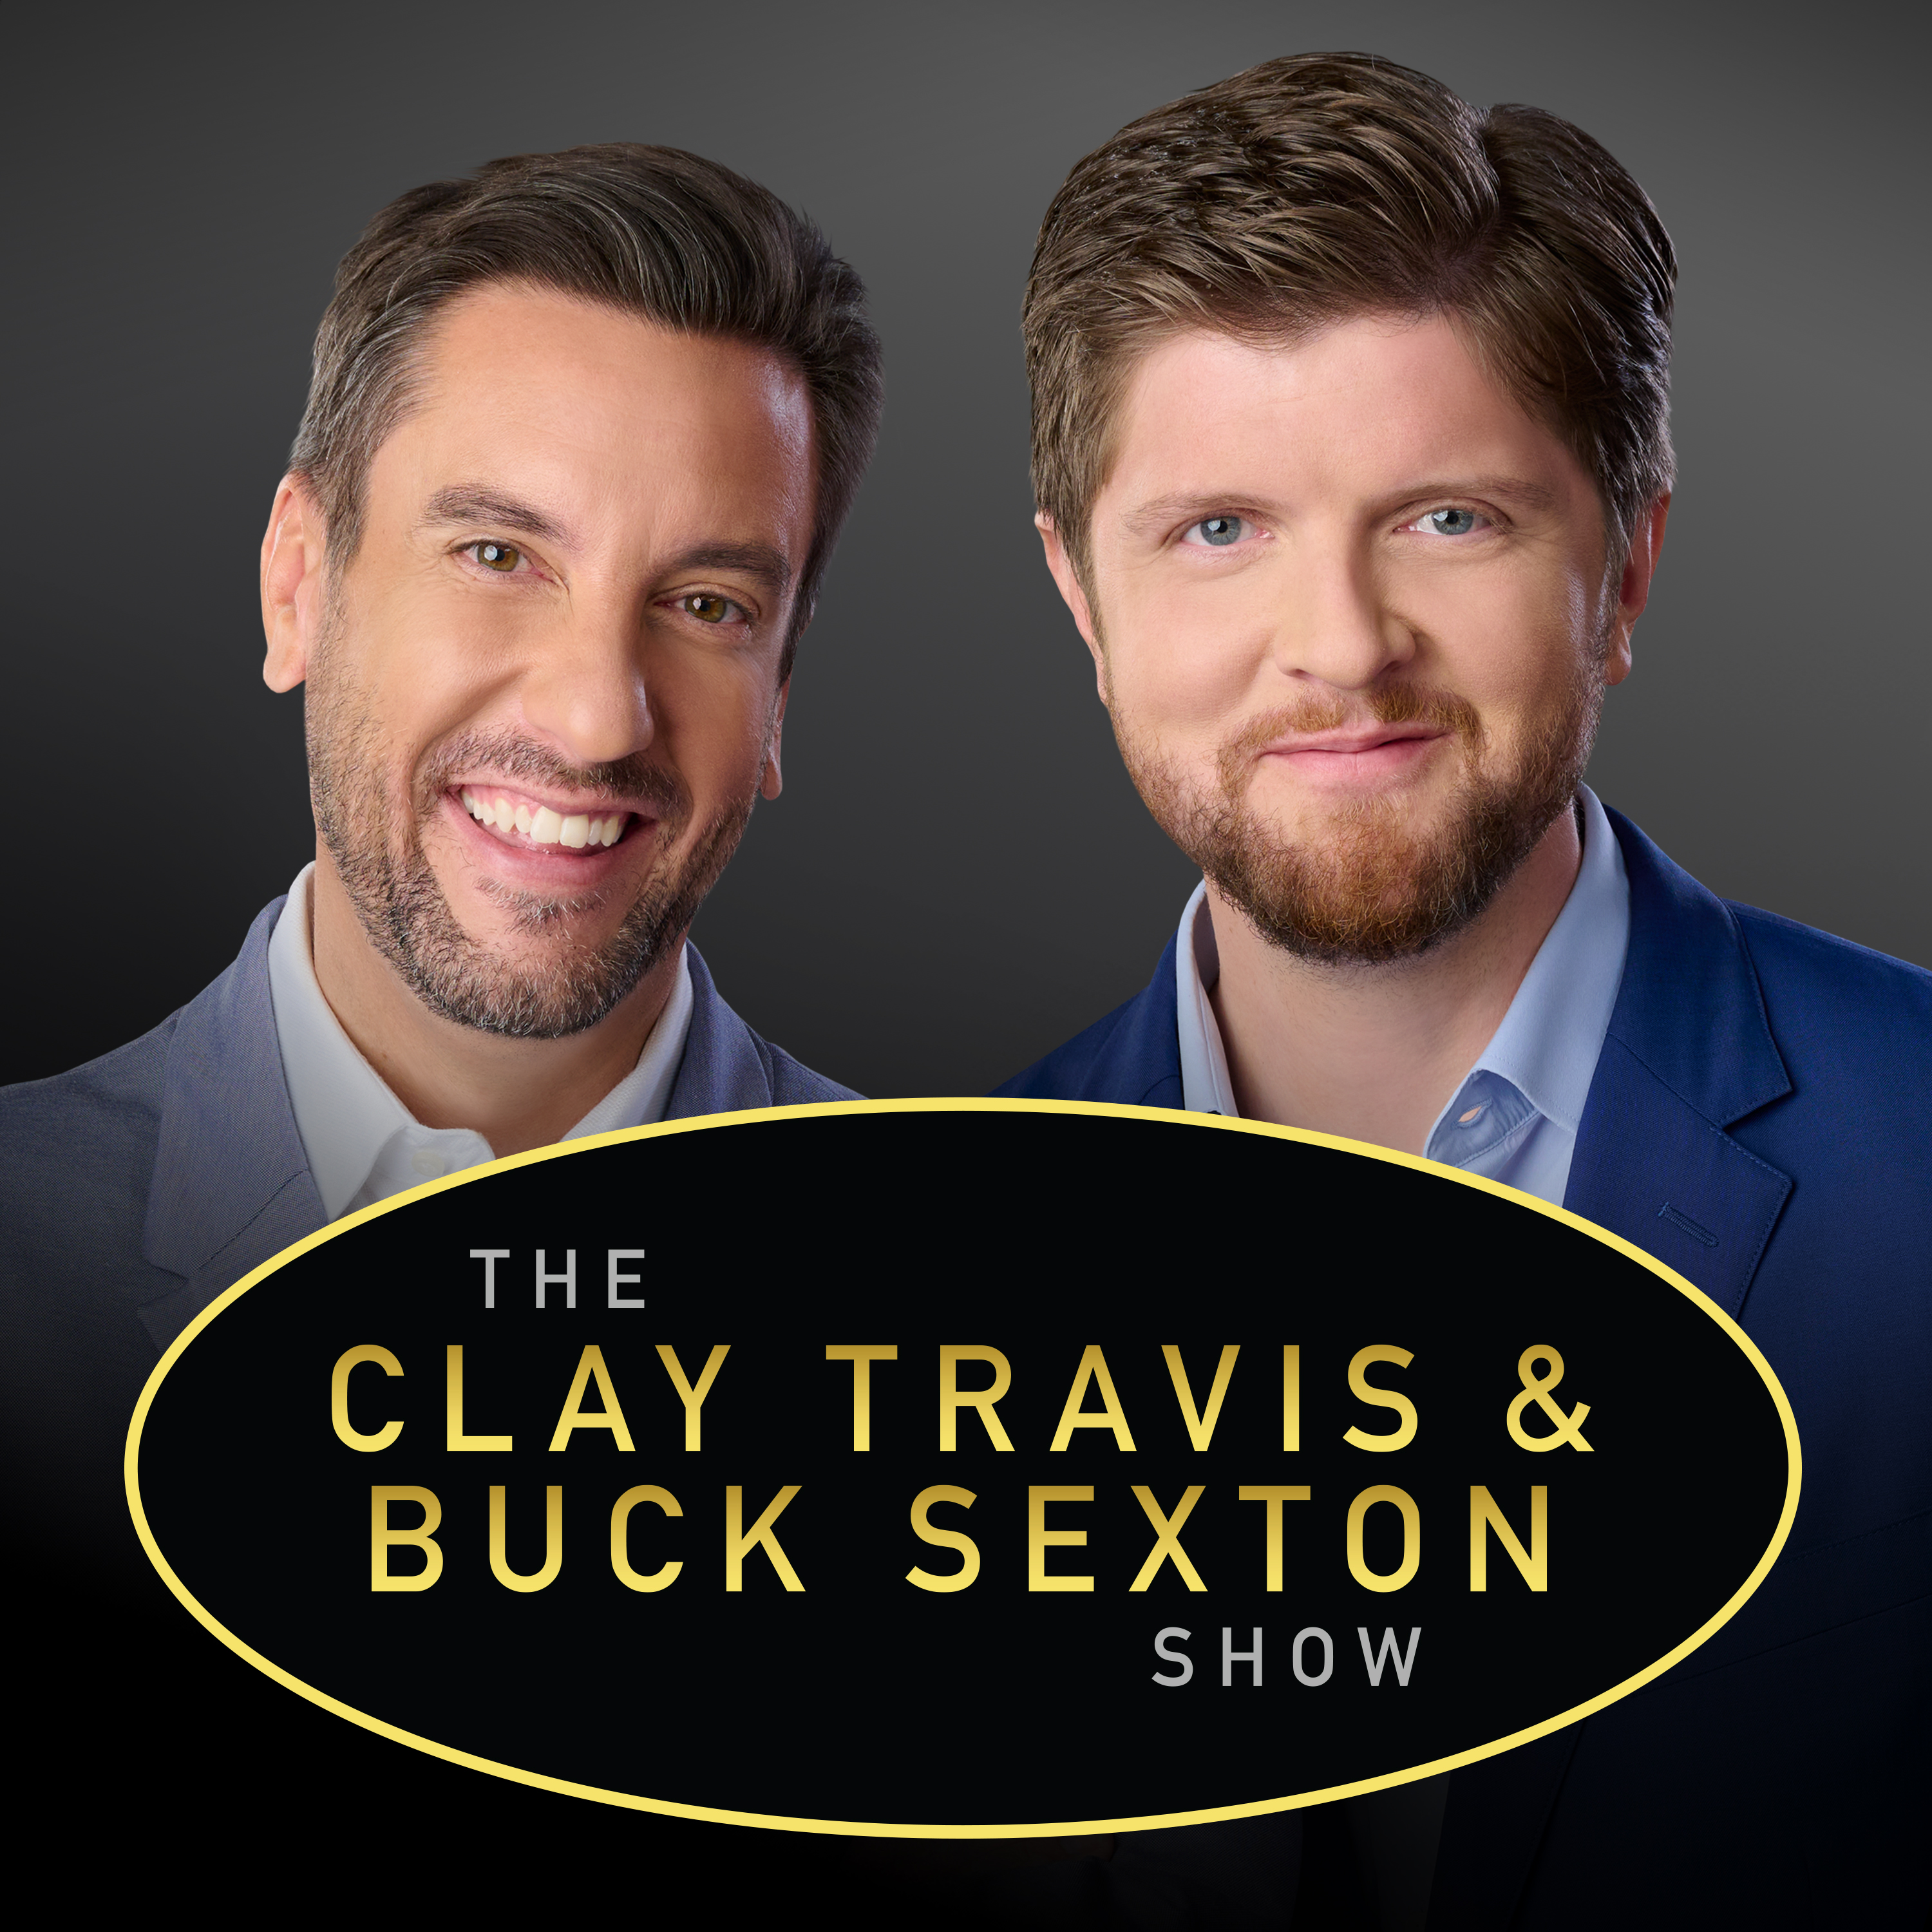 Clay Travis and Buck Sexton Show H1 – May 18 2022